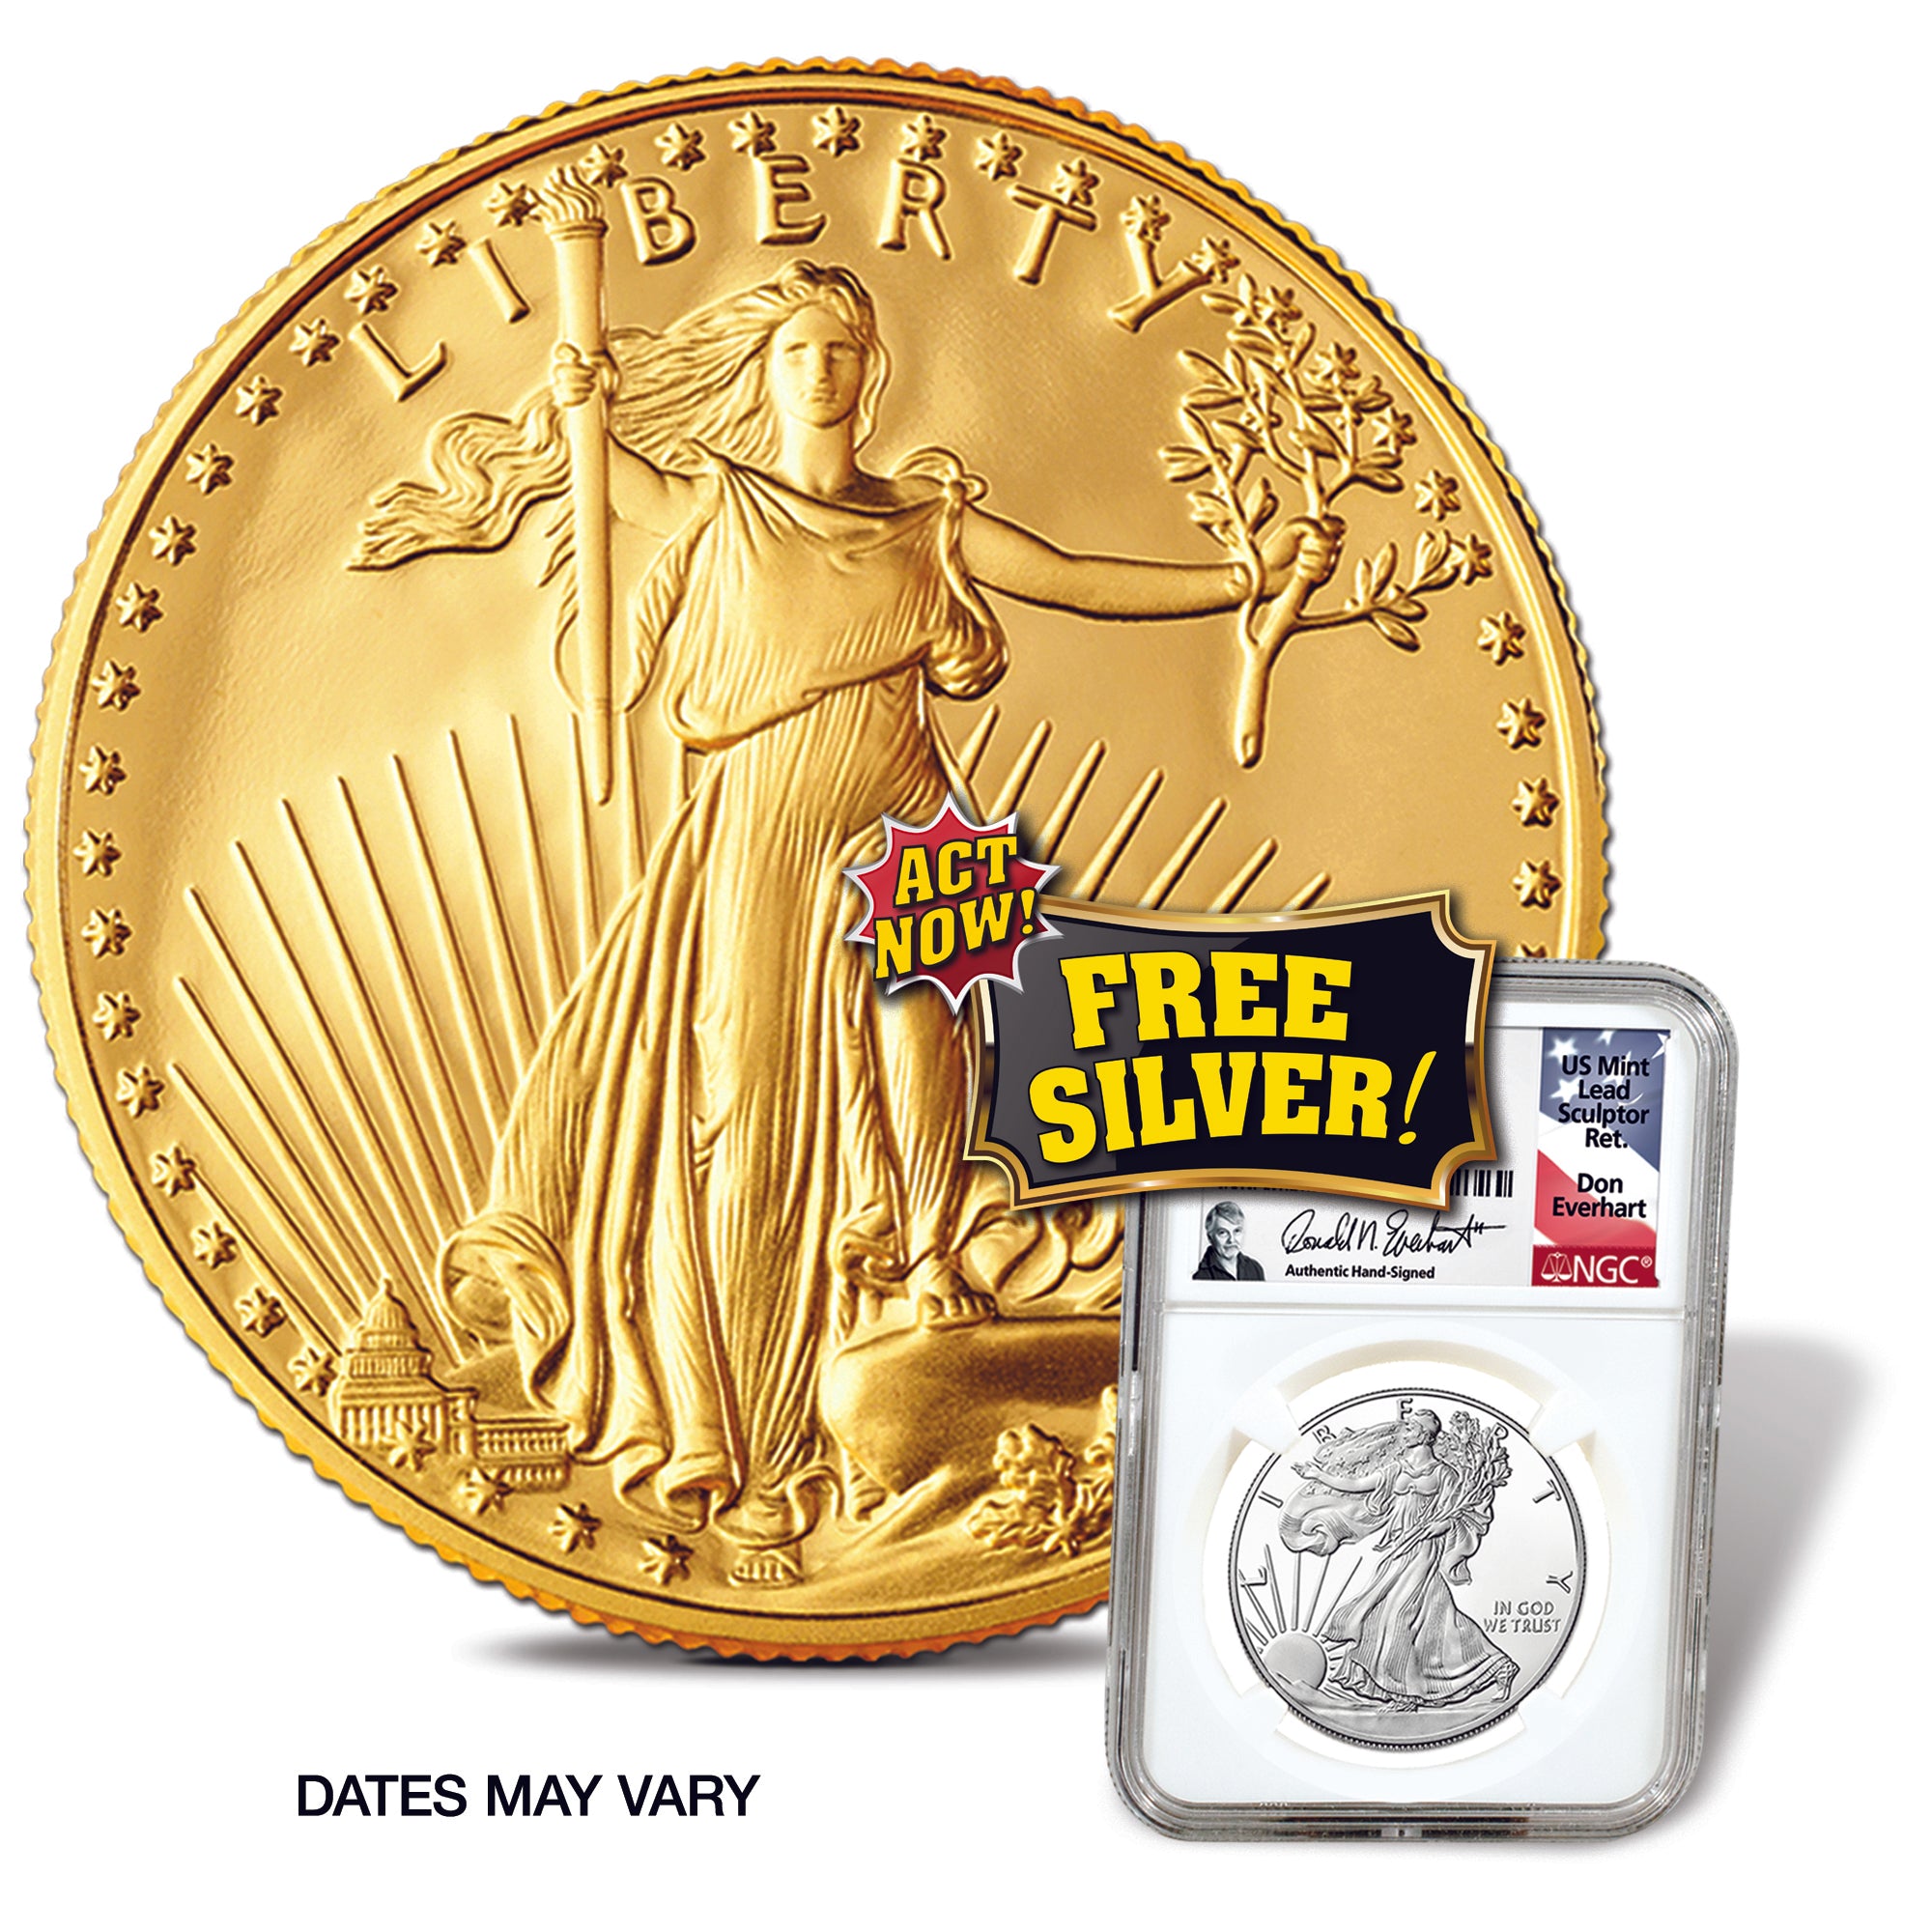 $50 GOLD EAGLE Only $2,150 with FREE SILVER. CALL IN SPECIAL ONLY!